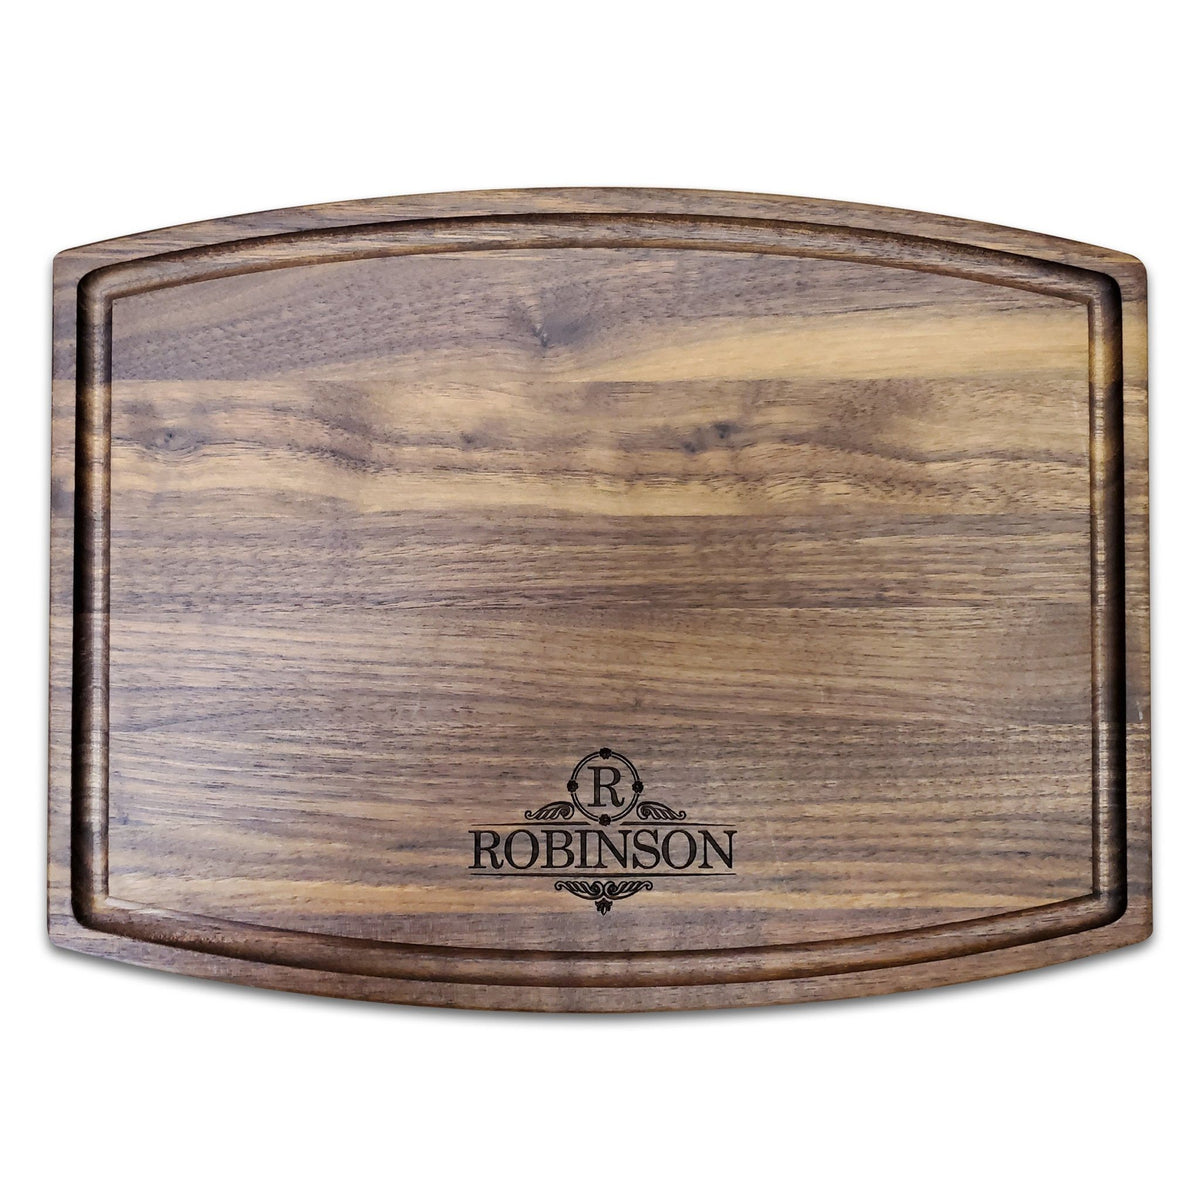 Arched Cherry Juice Groove Cutting Board 9.5 x 12 – Hailey Home